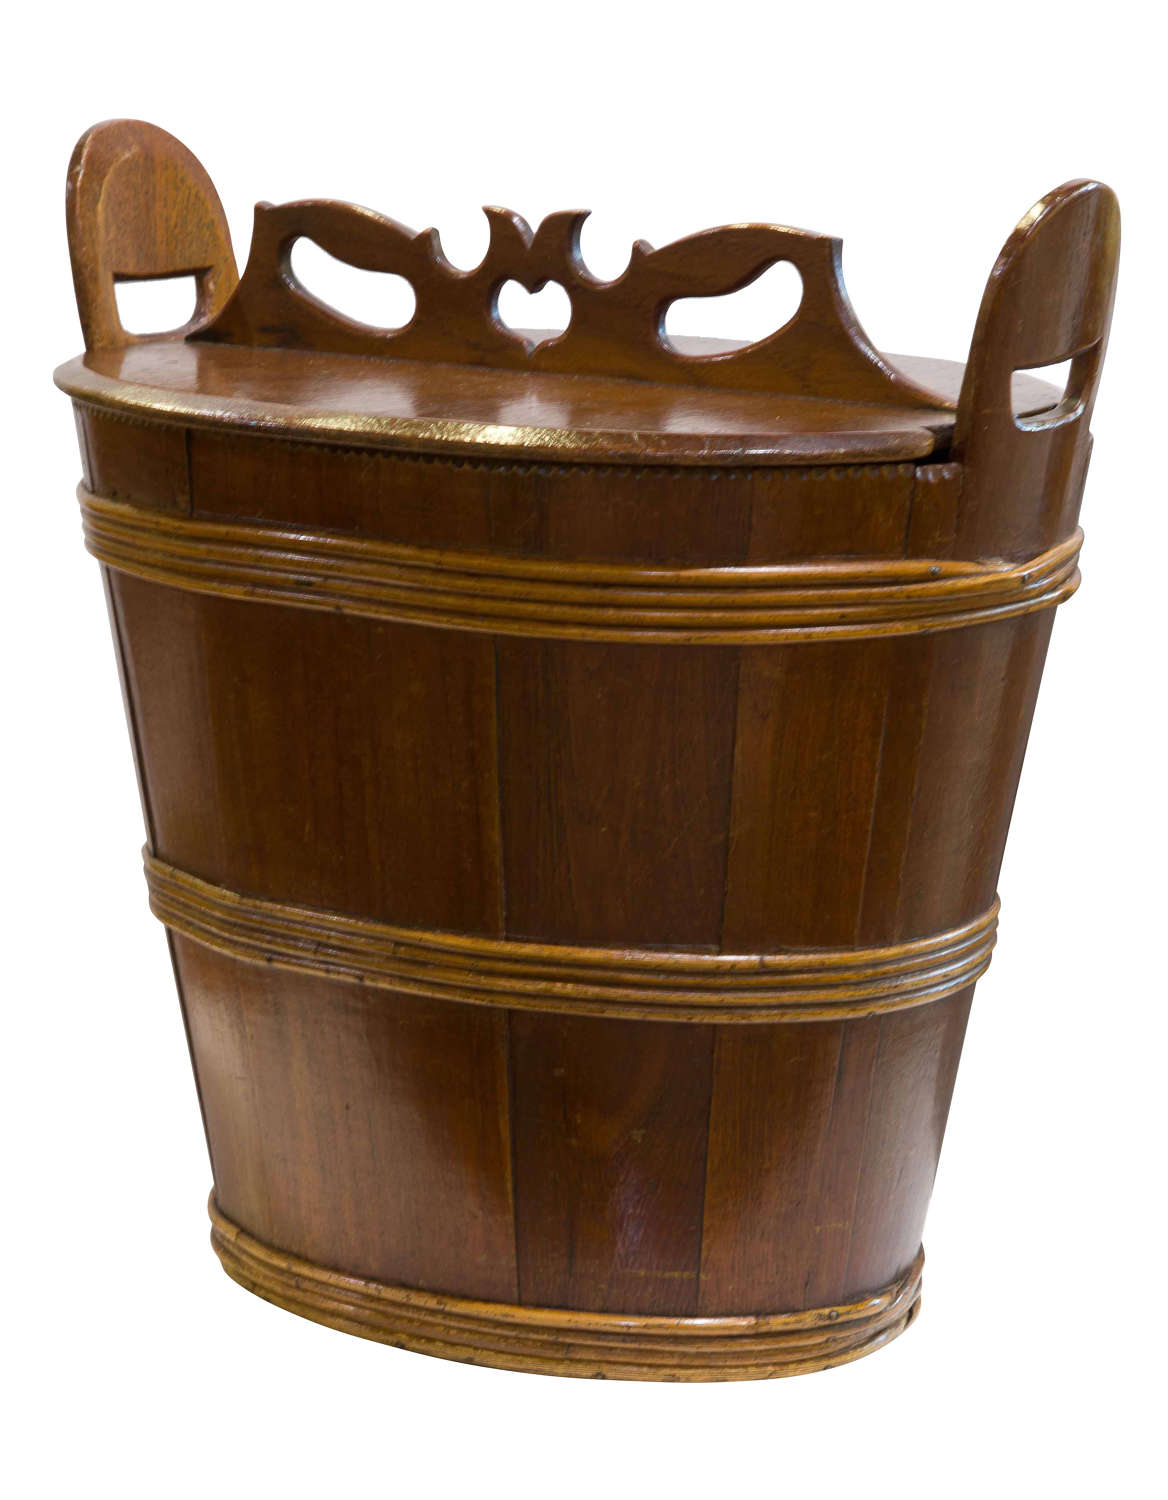 19th Century North European Oval Butter Tub